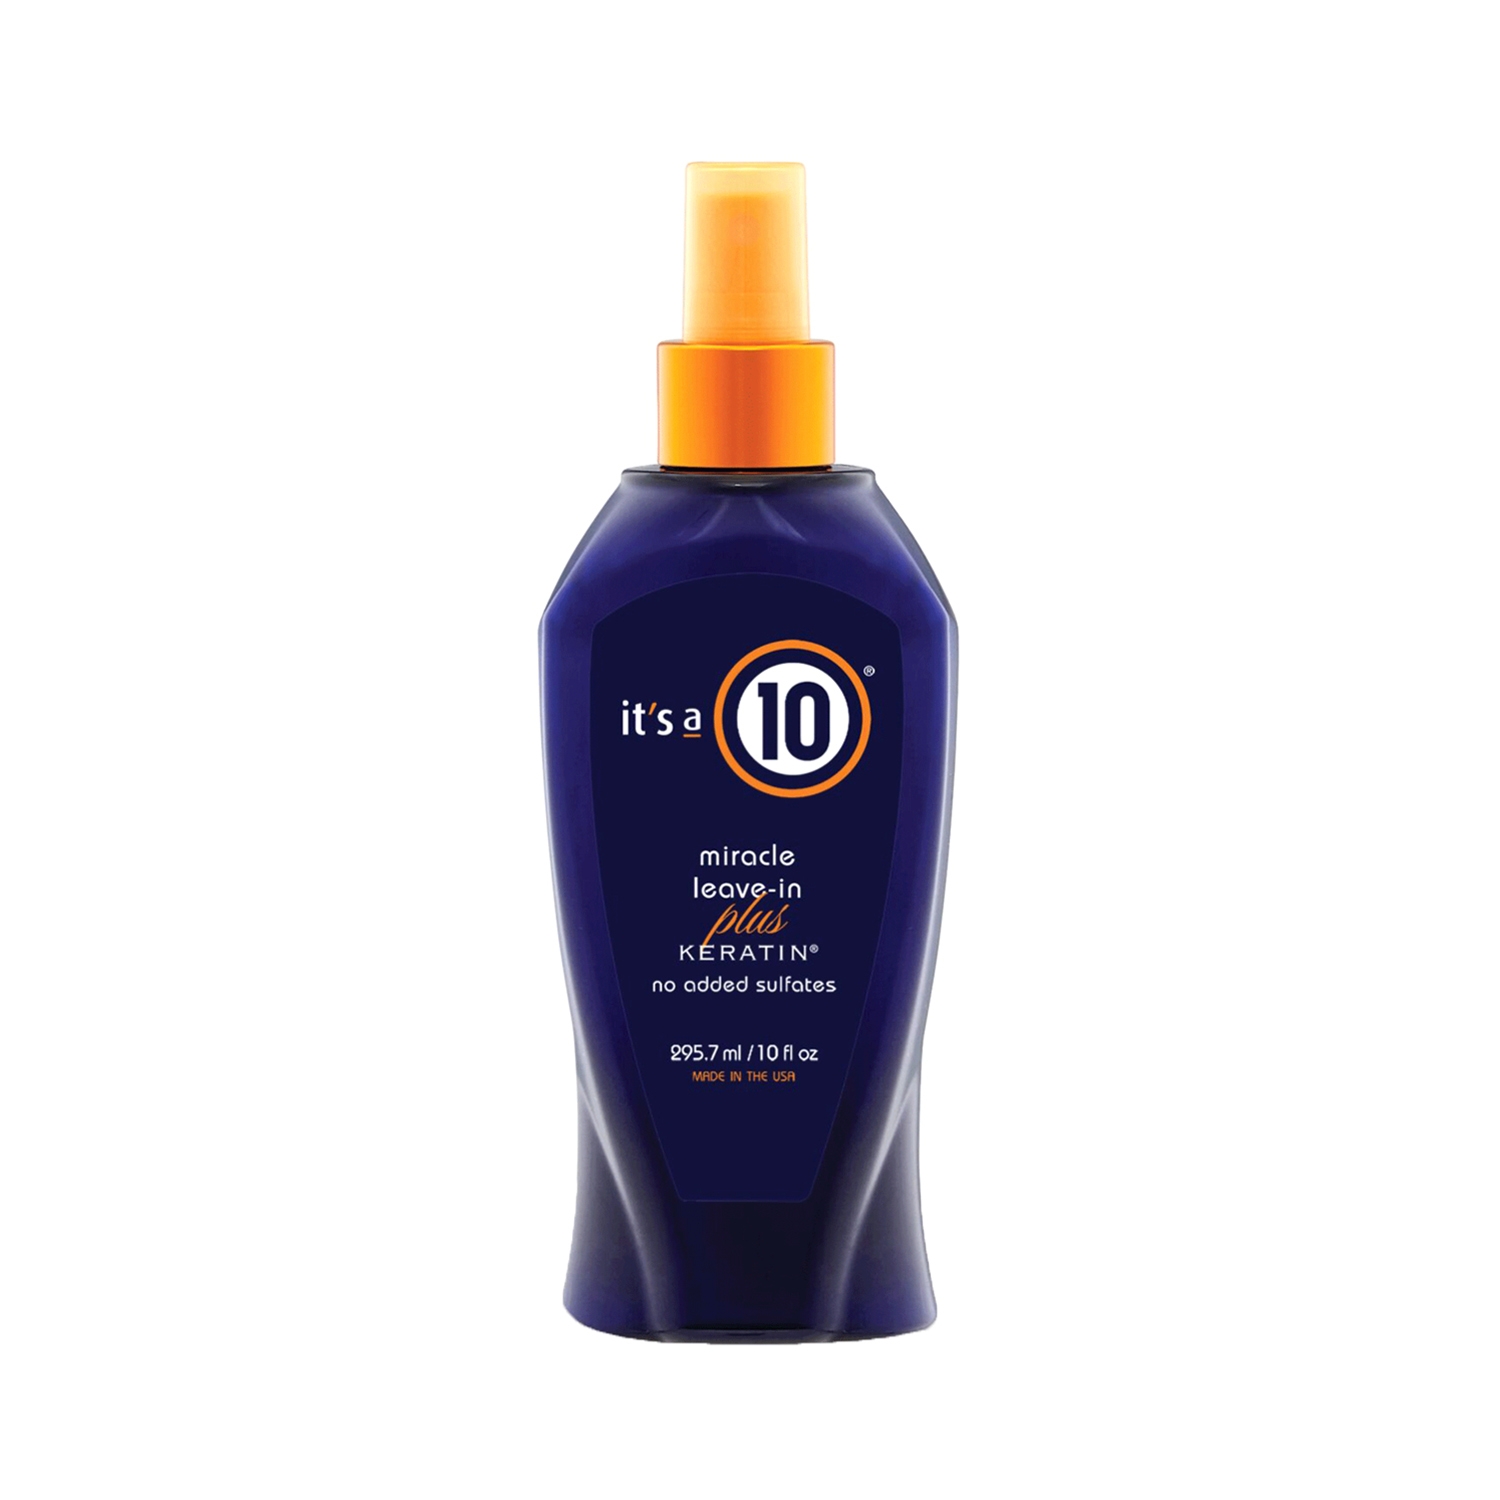 It's a 10 Haircare | It's a 10 Haircare Miracle Leave In Plus Keratin (295.75ml)